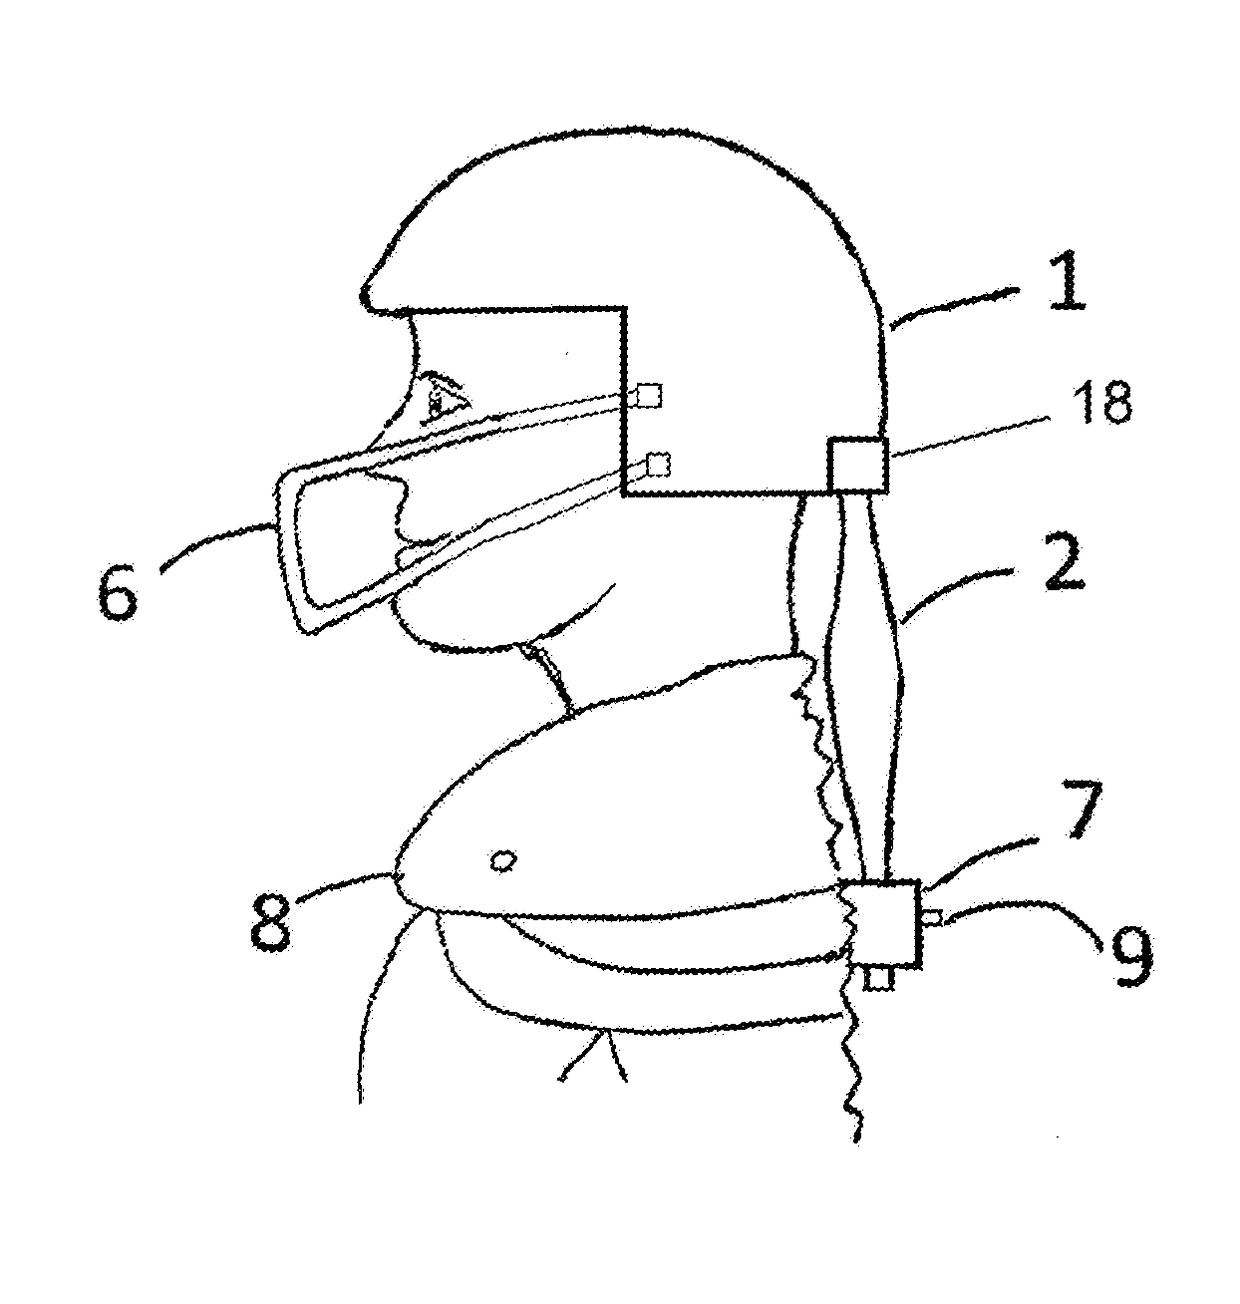 Helmet Extension Connected to Shoulder Pad to Prevent Brain and Spine Injuries